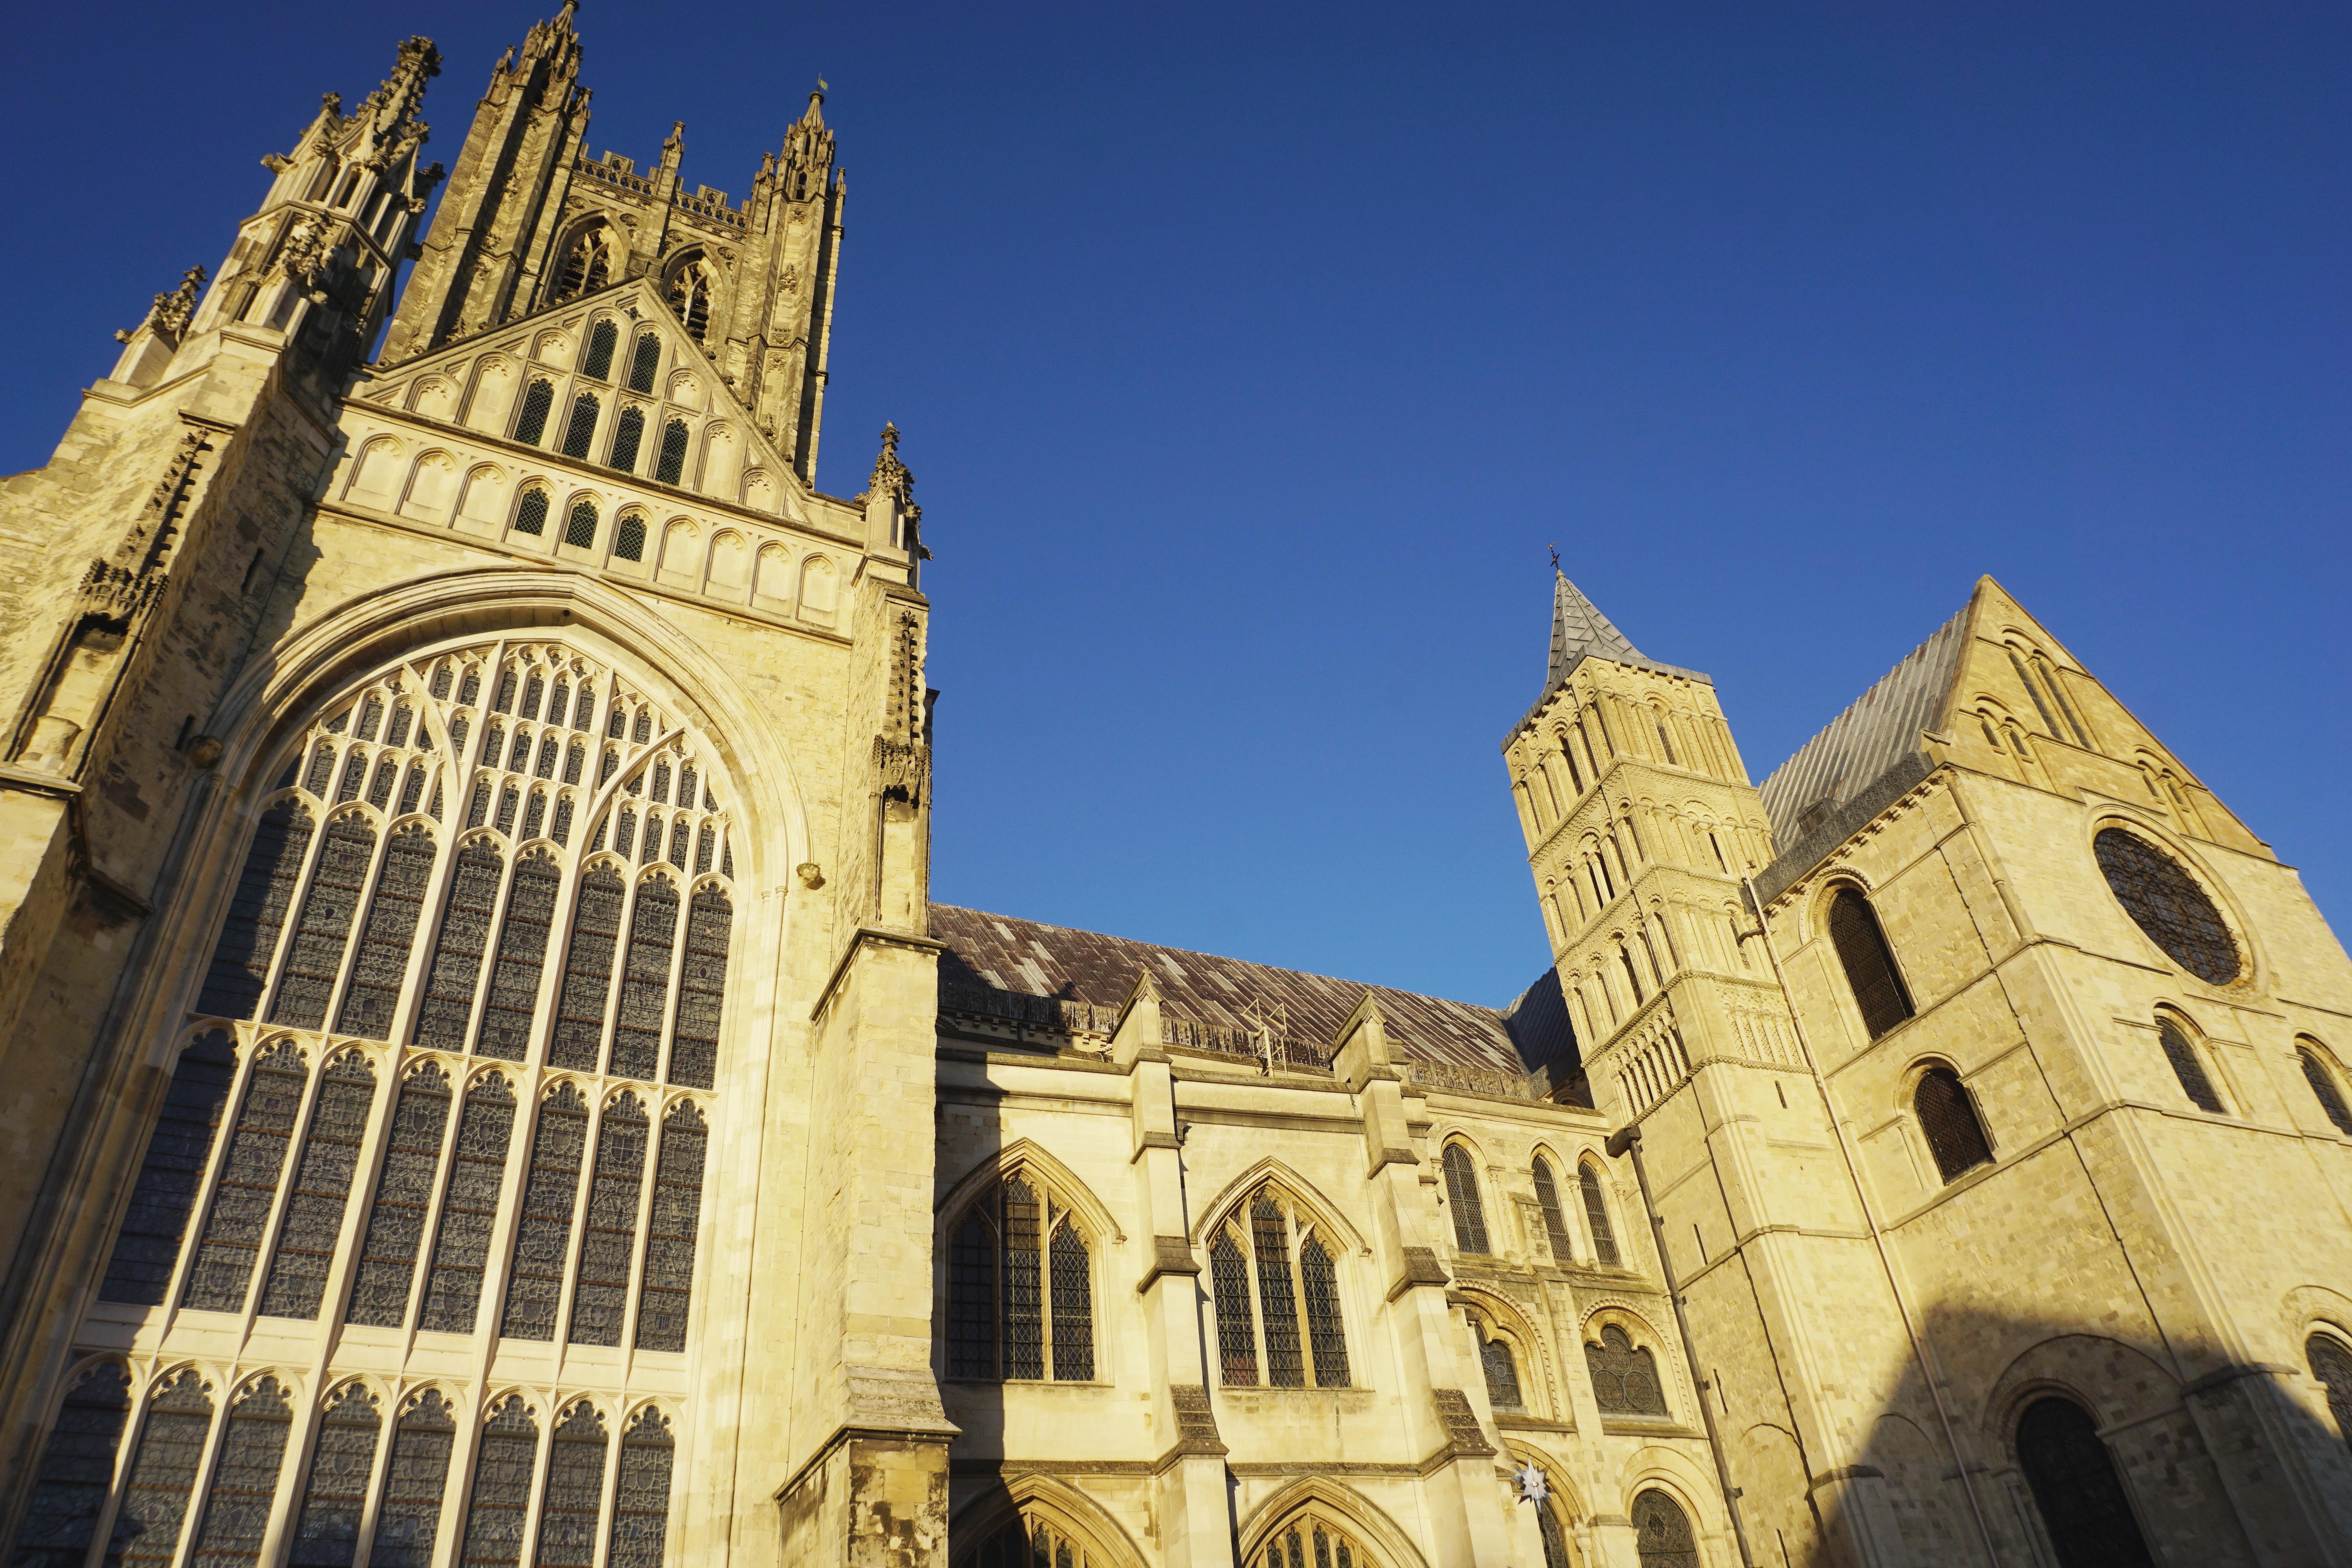 One day in Canterbury - Planning the perfect trip